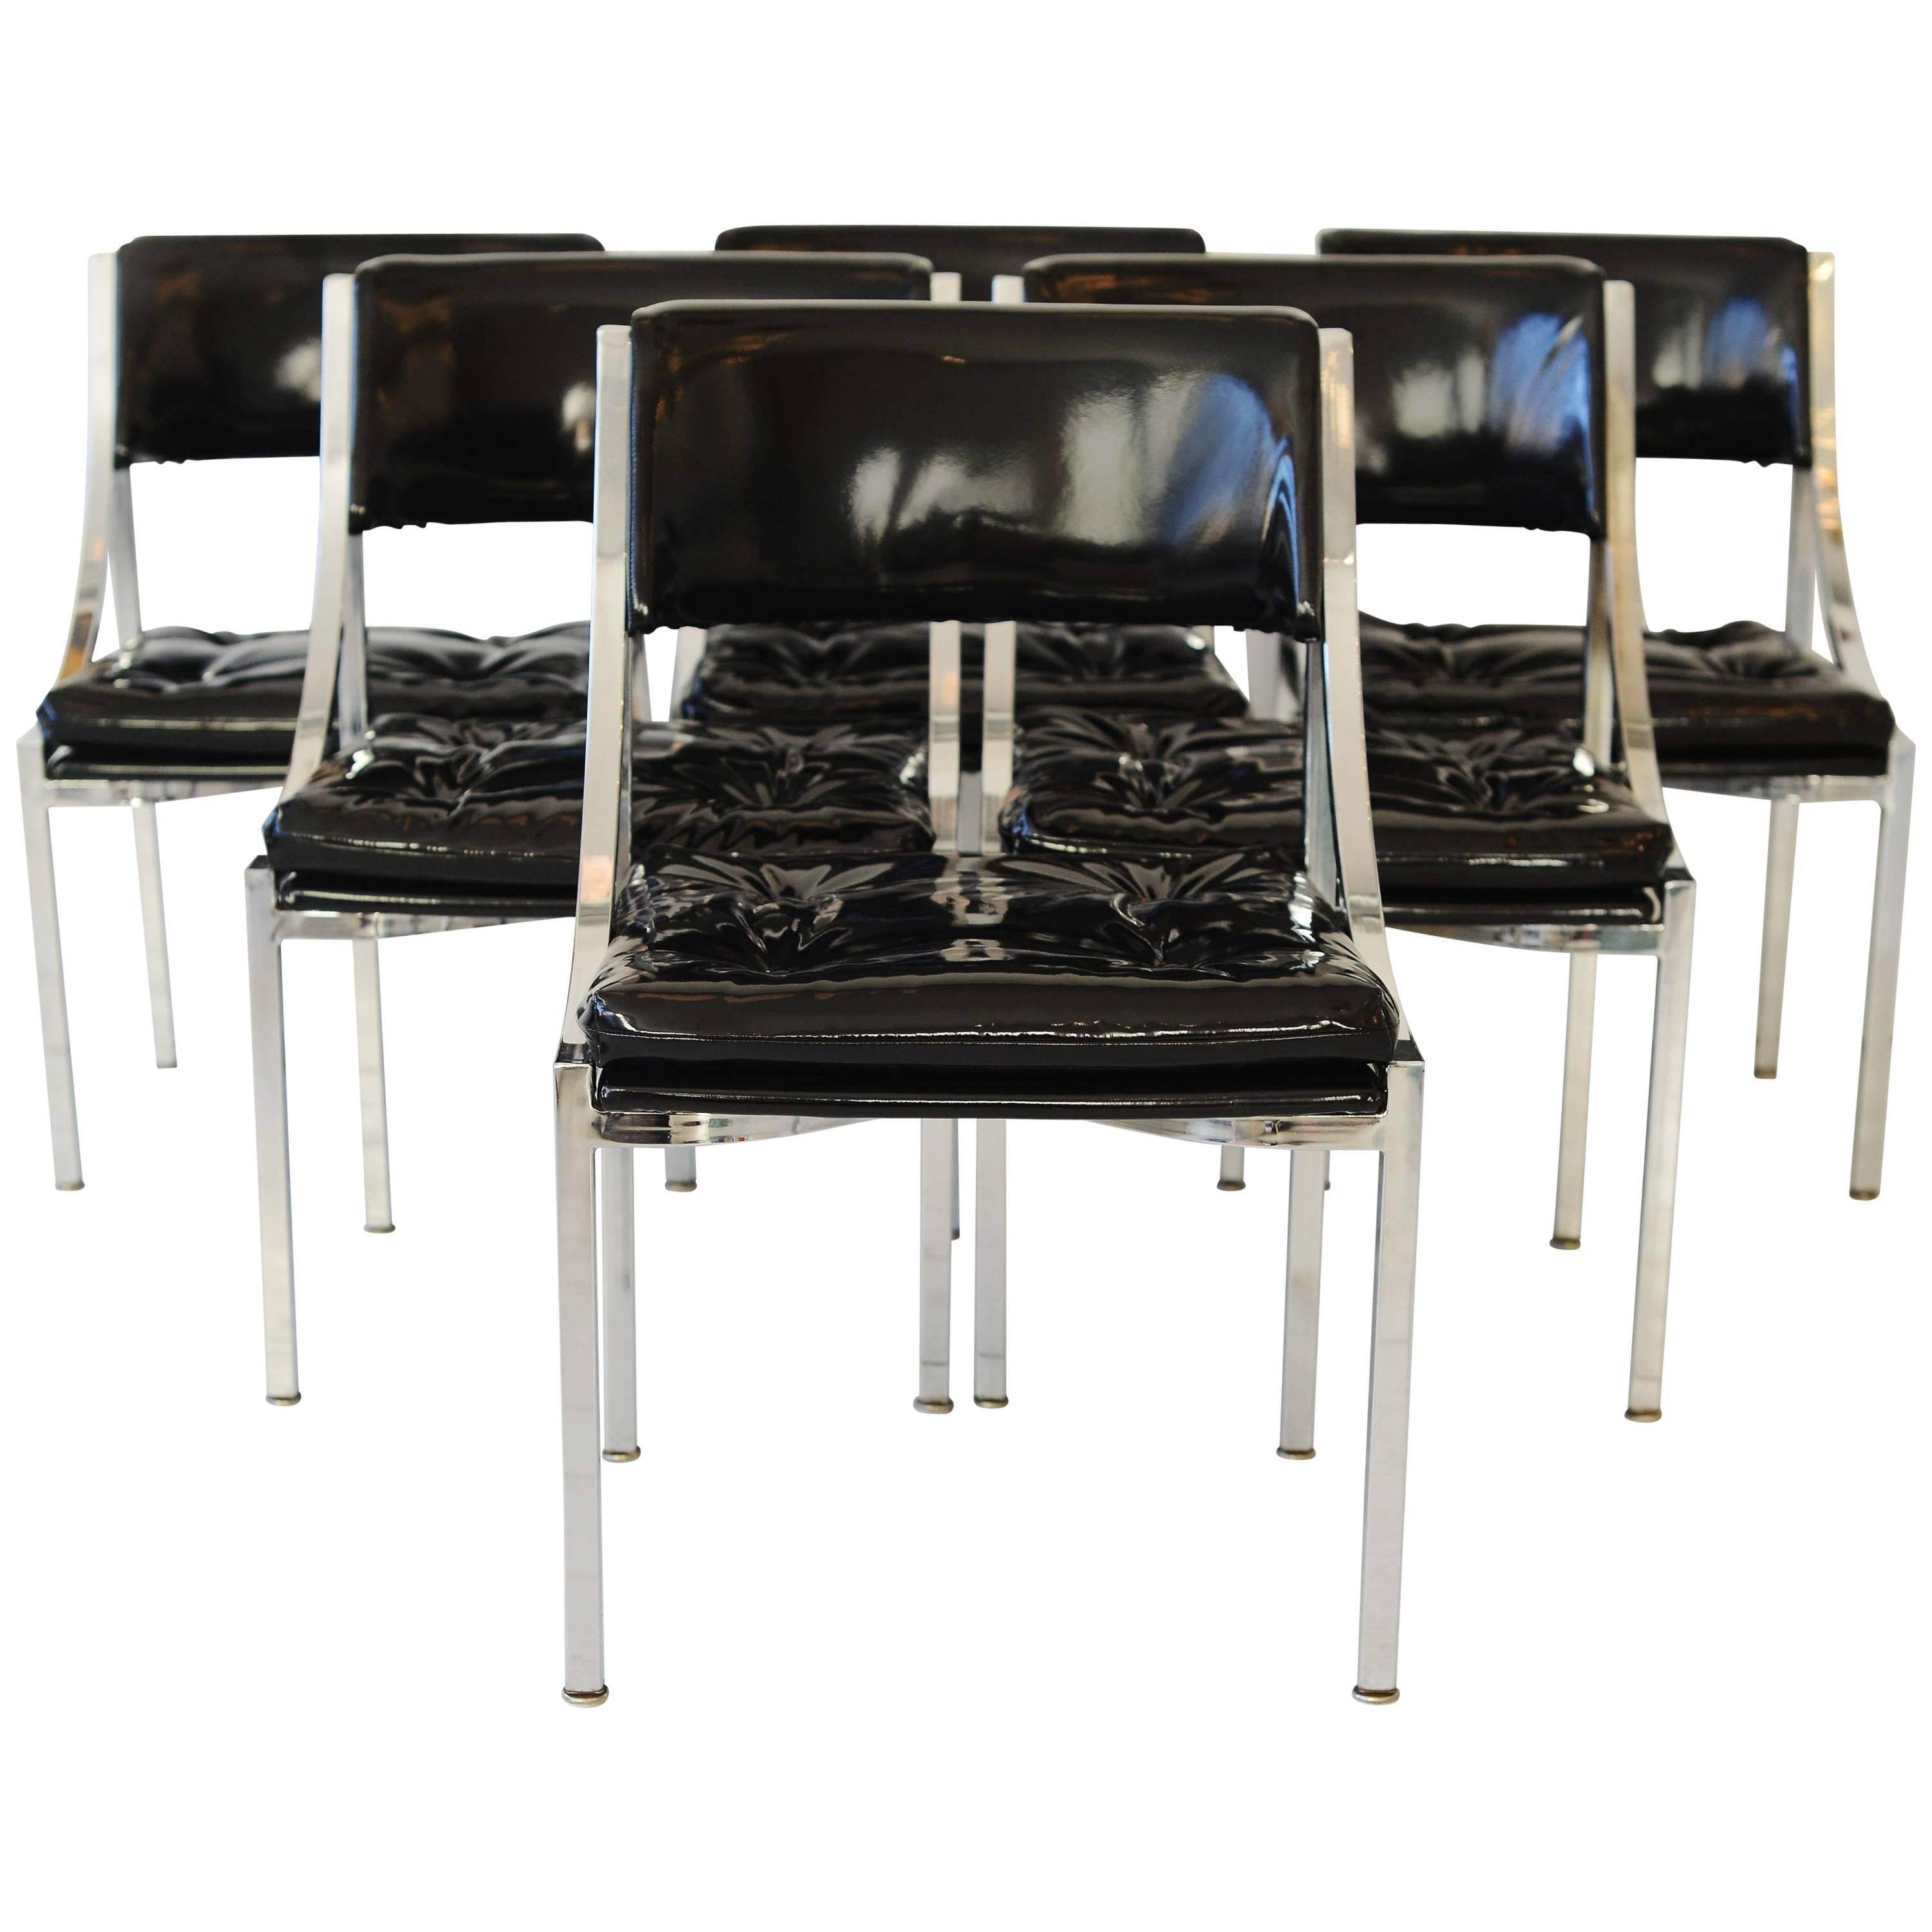 Set of Six Mid-Century Polished Chrome Chairs. Covered in black patent leather For Sale